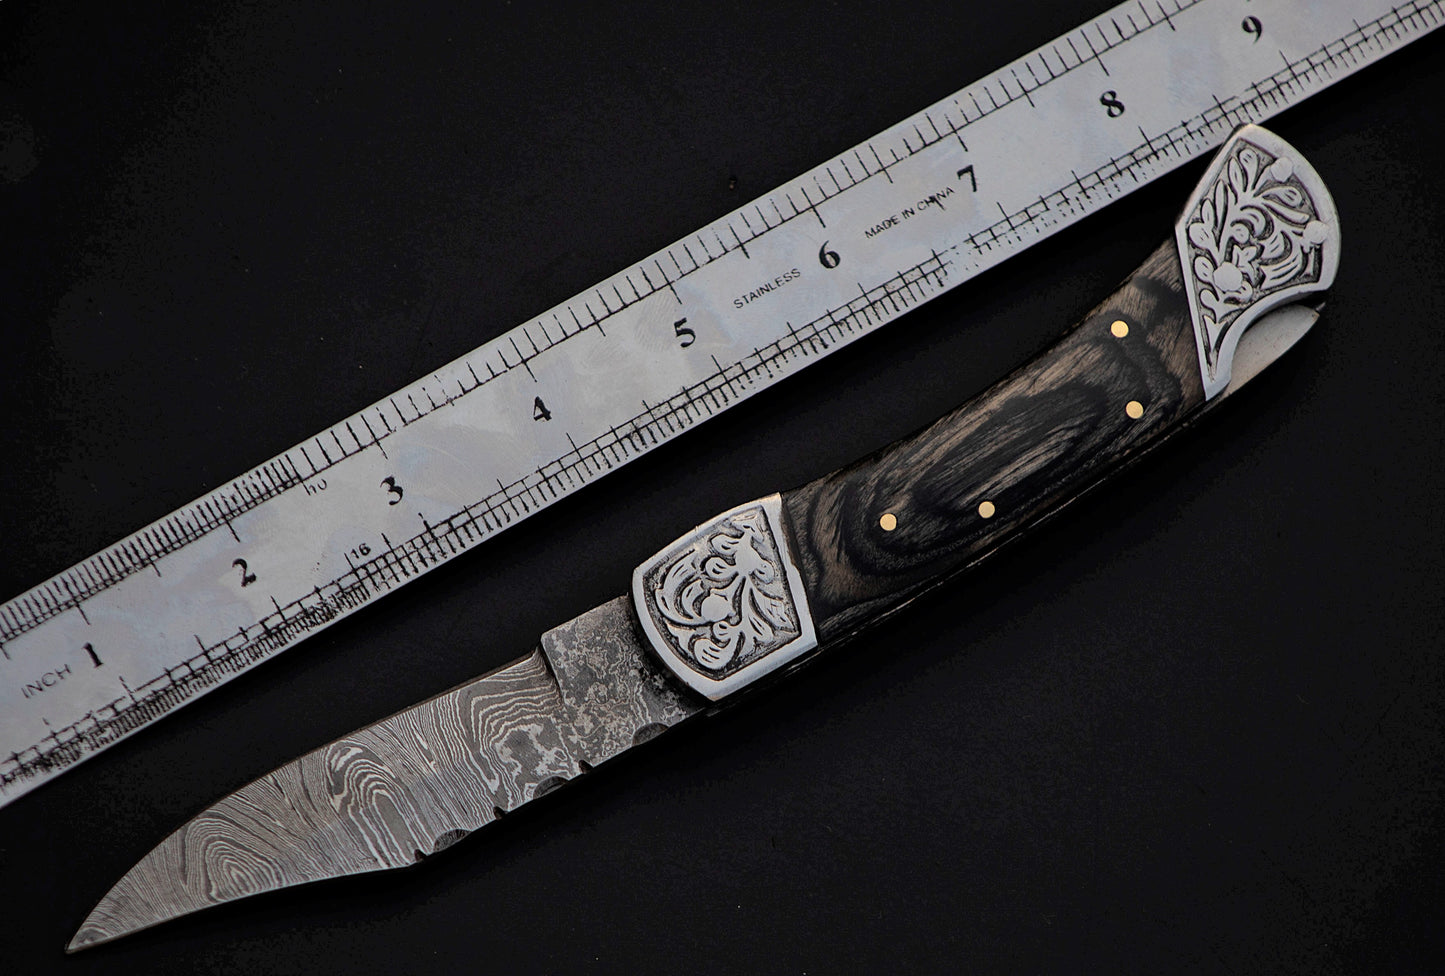 9" long back lock Folding Knife, Black wood Scale with Engraved steel bolster, custom made 4" Hand Forged Damascus steel blade, Cow hide leather sheath with belt loop